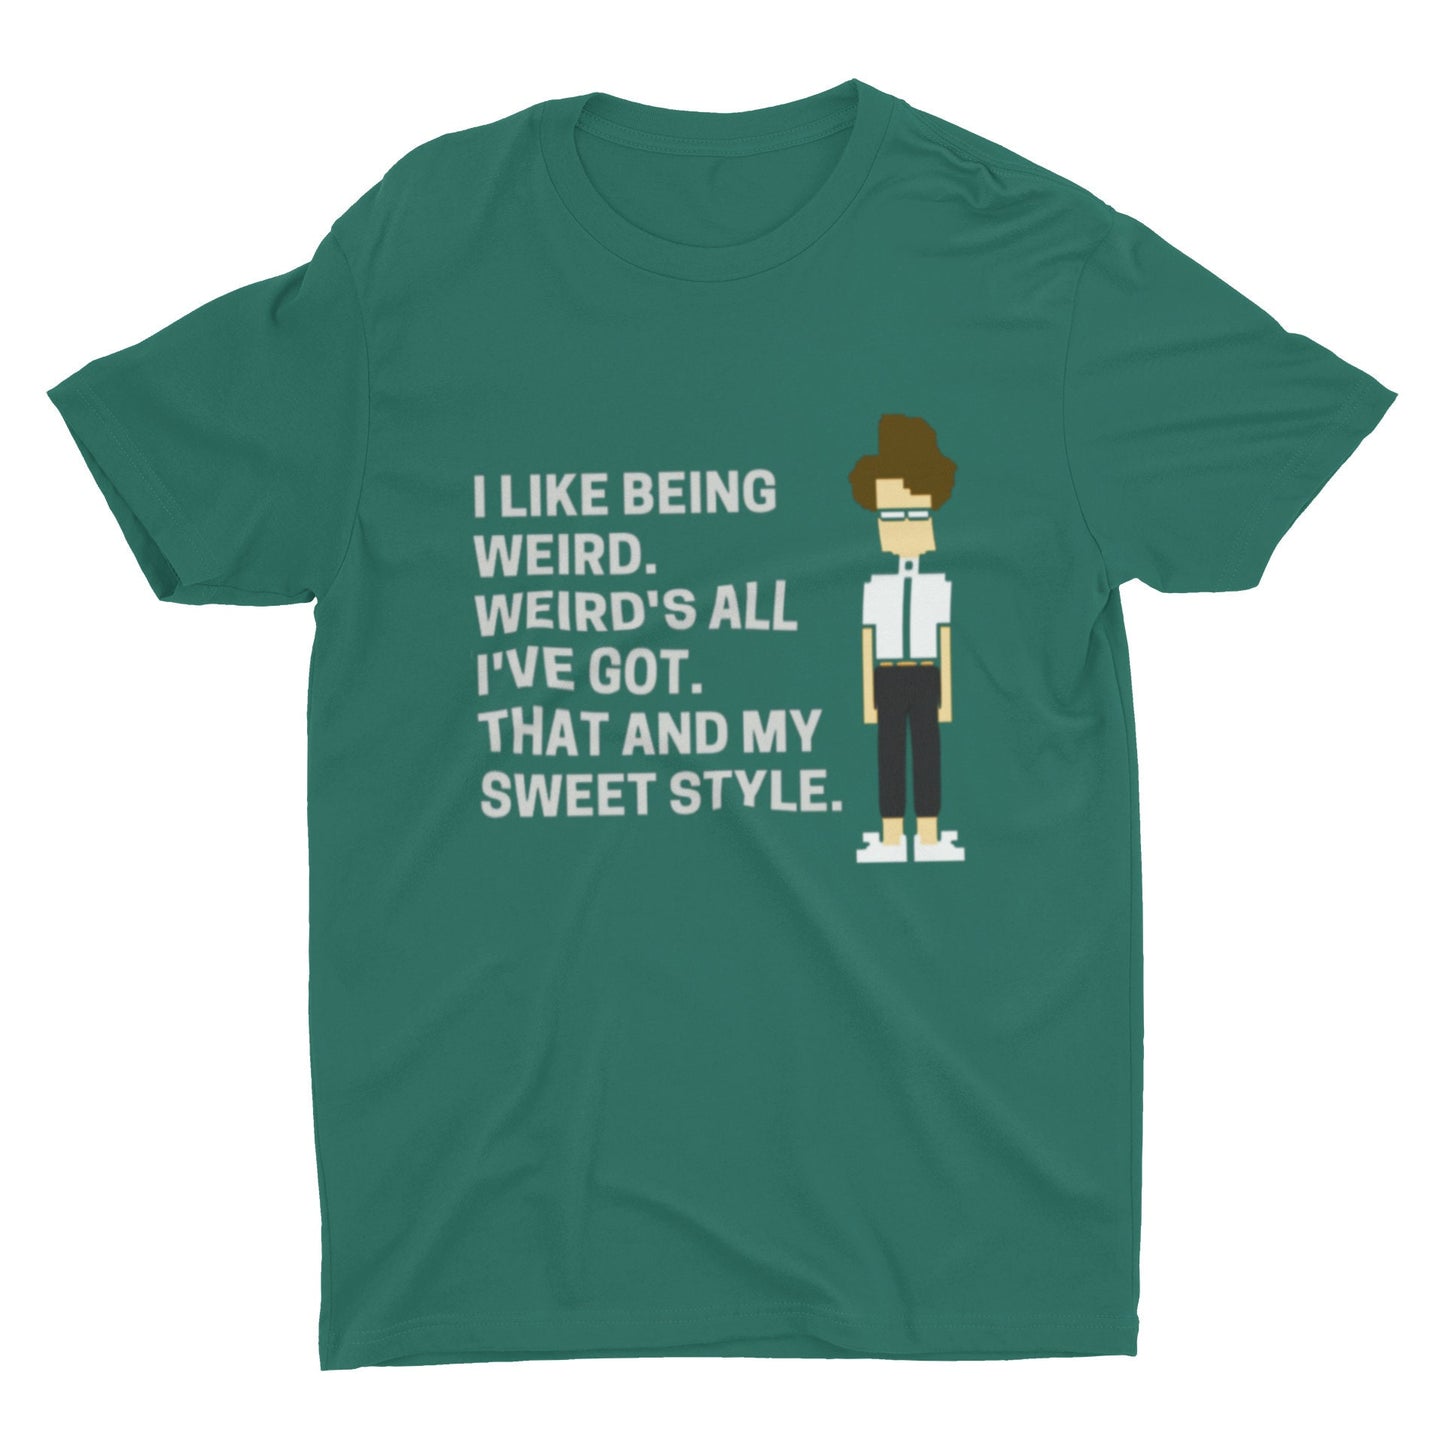 The IT Crowd Moss Sweet Style T-Shirt | IT Crowd T Shirt | Moss T Shirt | IT Crowd Moss Funny T Shirt | Maurice Moss